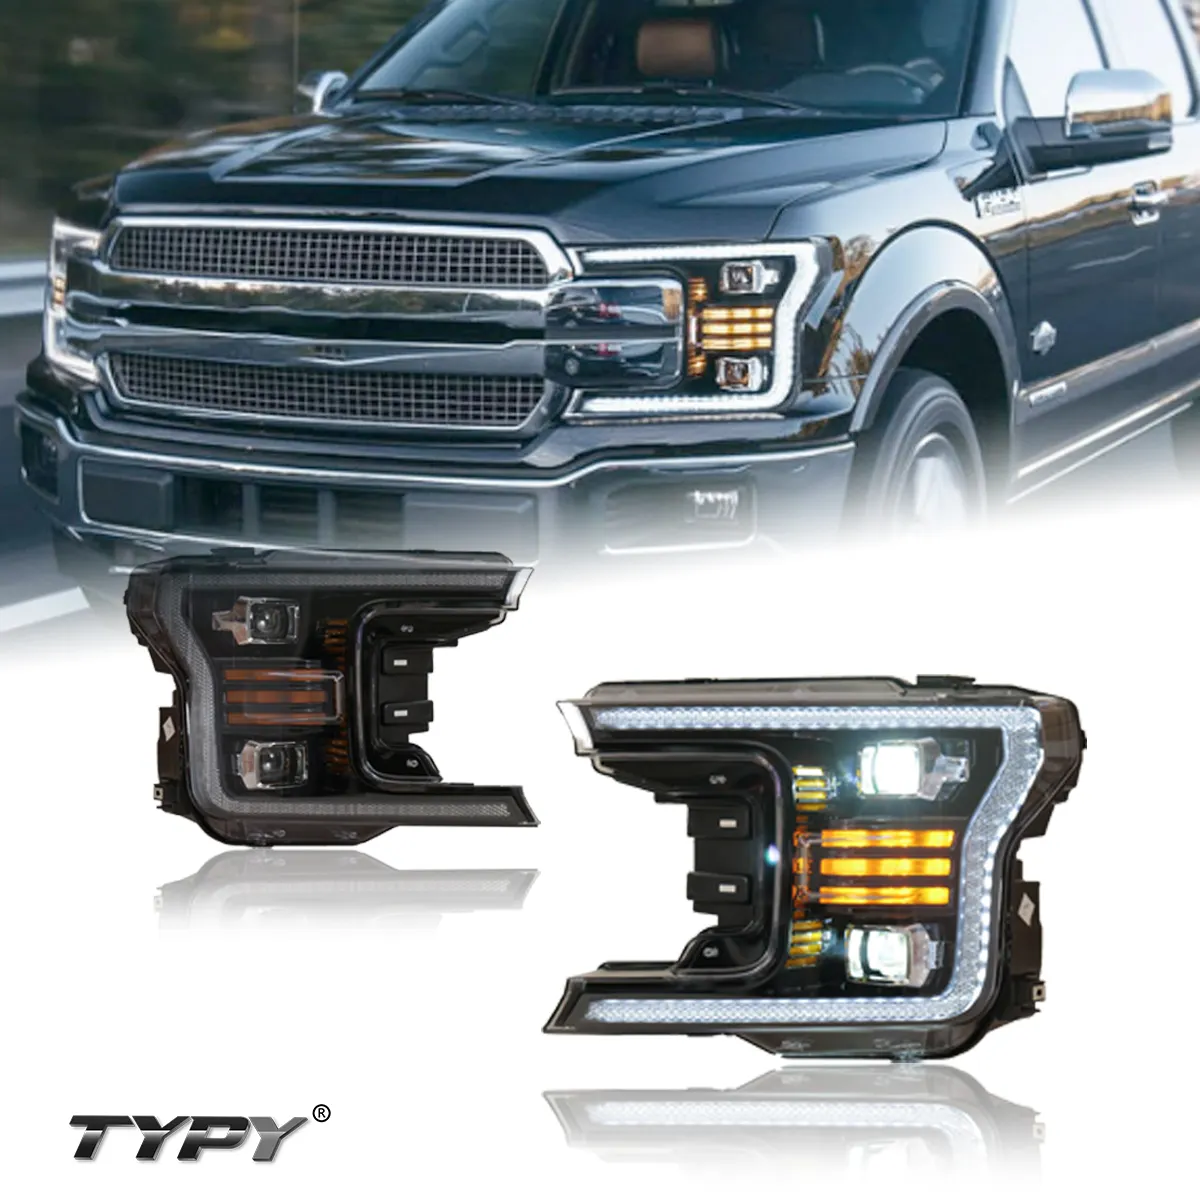 Archaic Full LED headlamp pickup13th Gen headlight with DRL+high low beam lights For Ford F150 2017-2020